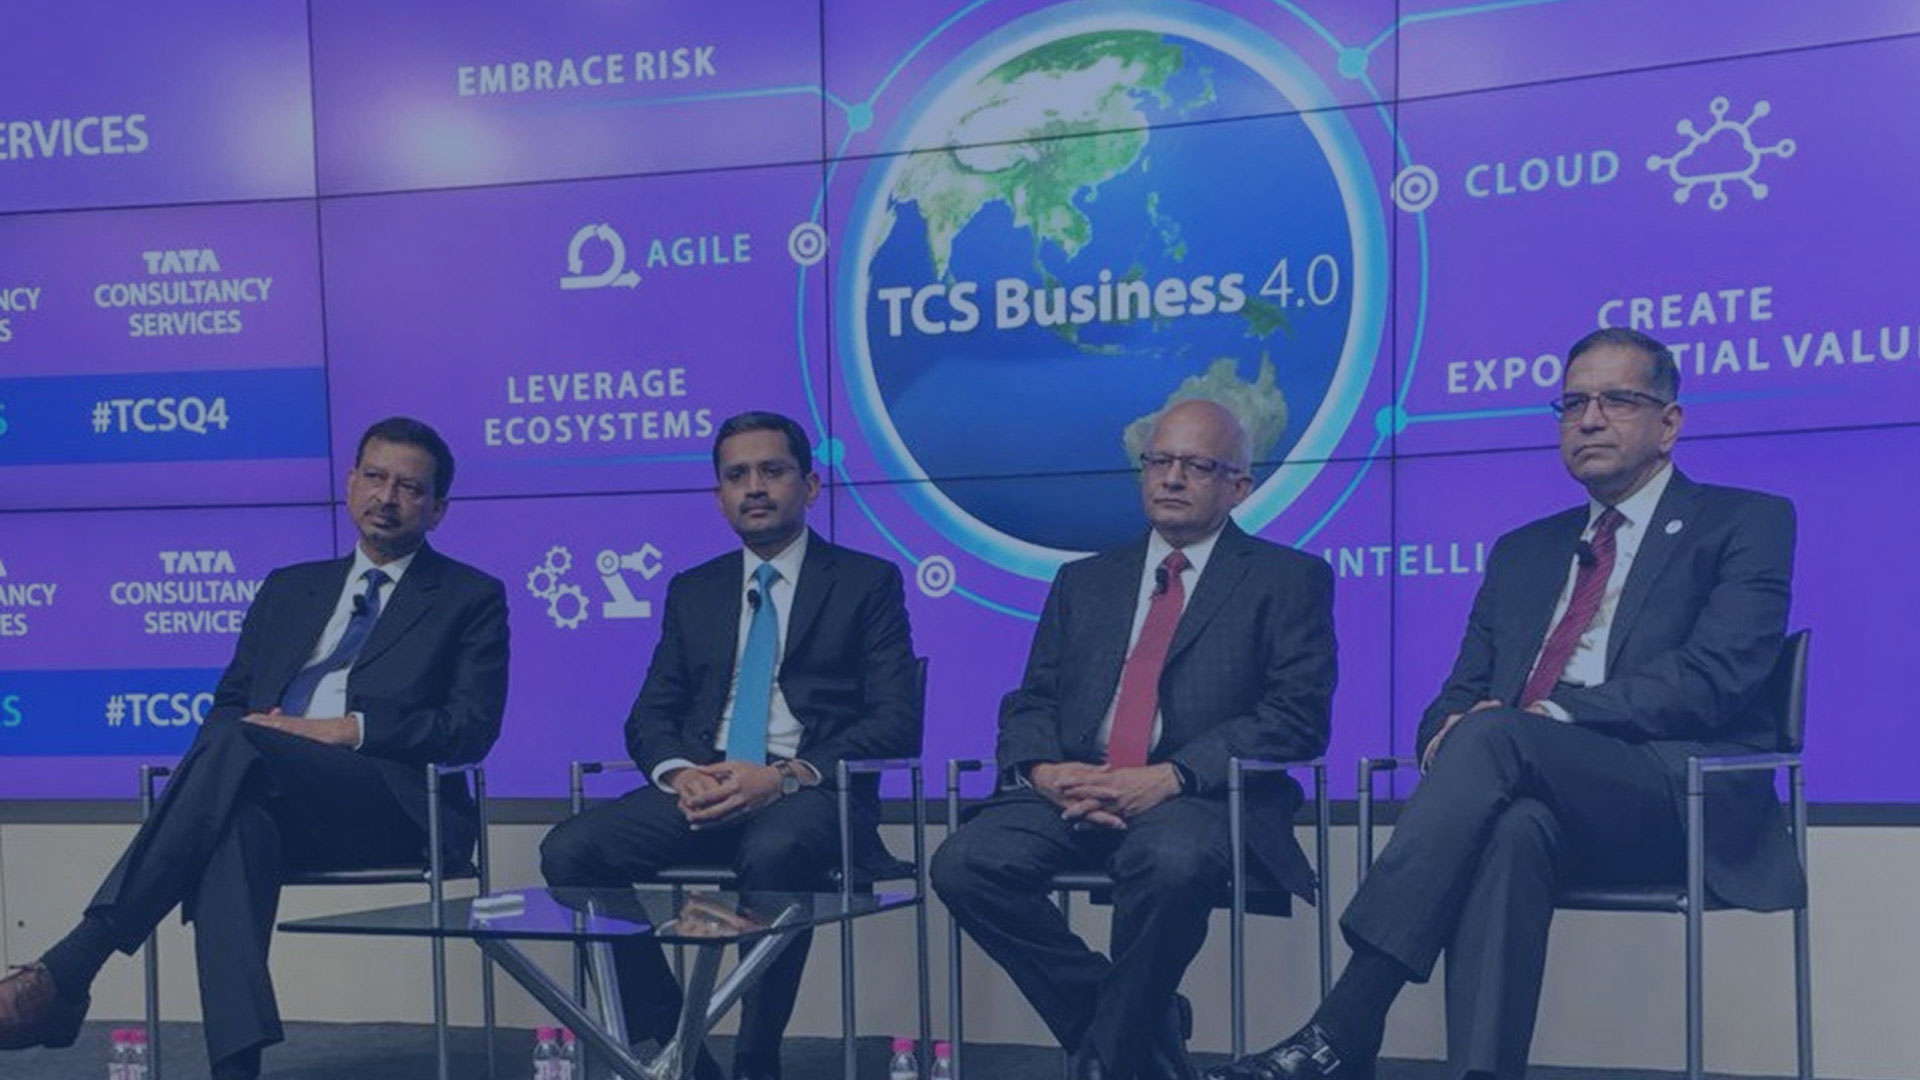 The new TCS leadership at the launch of Business 4.0